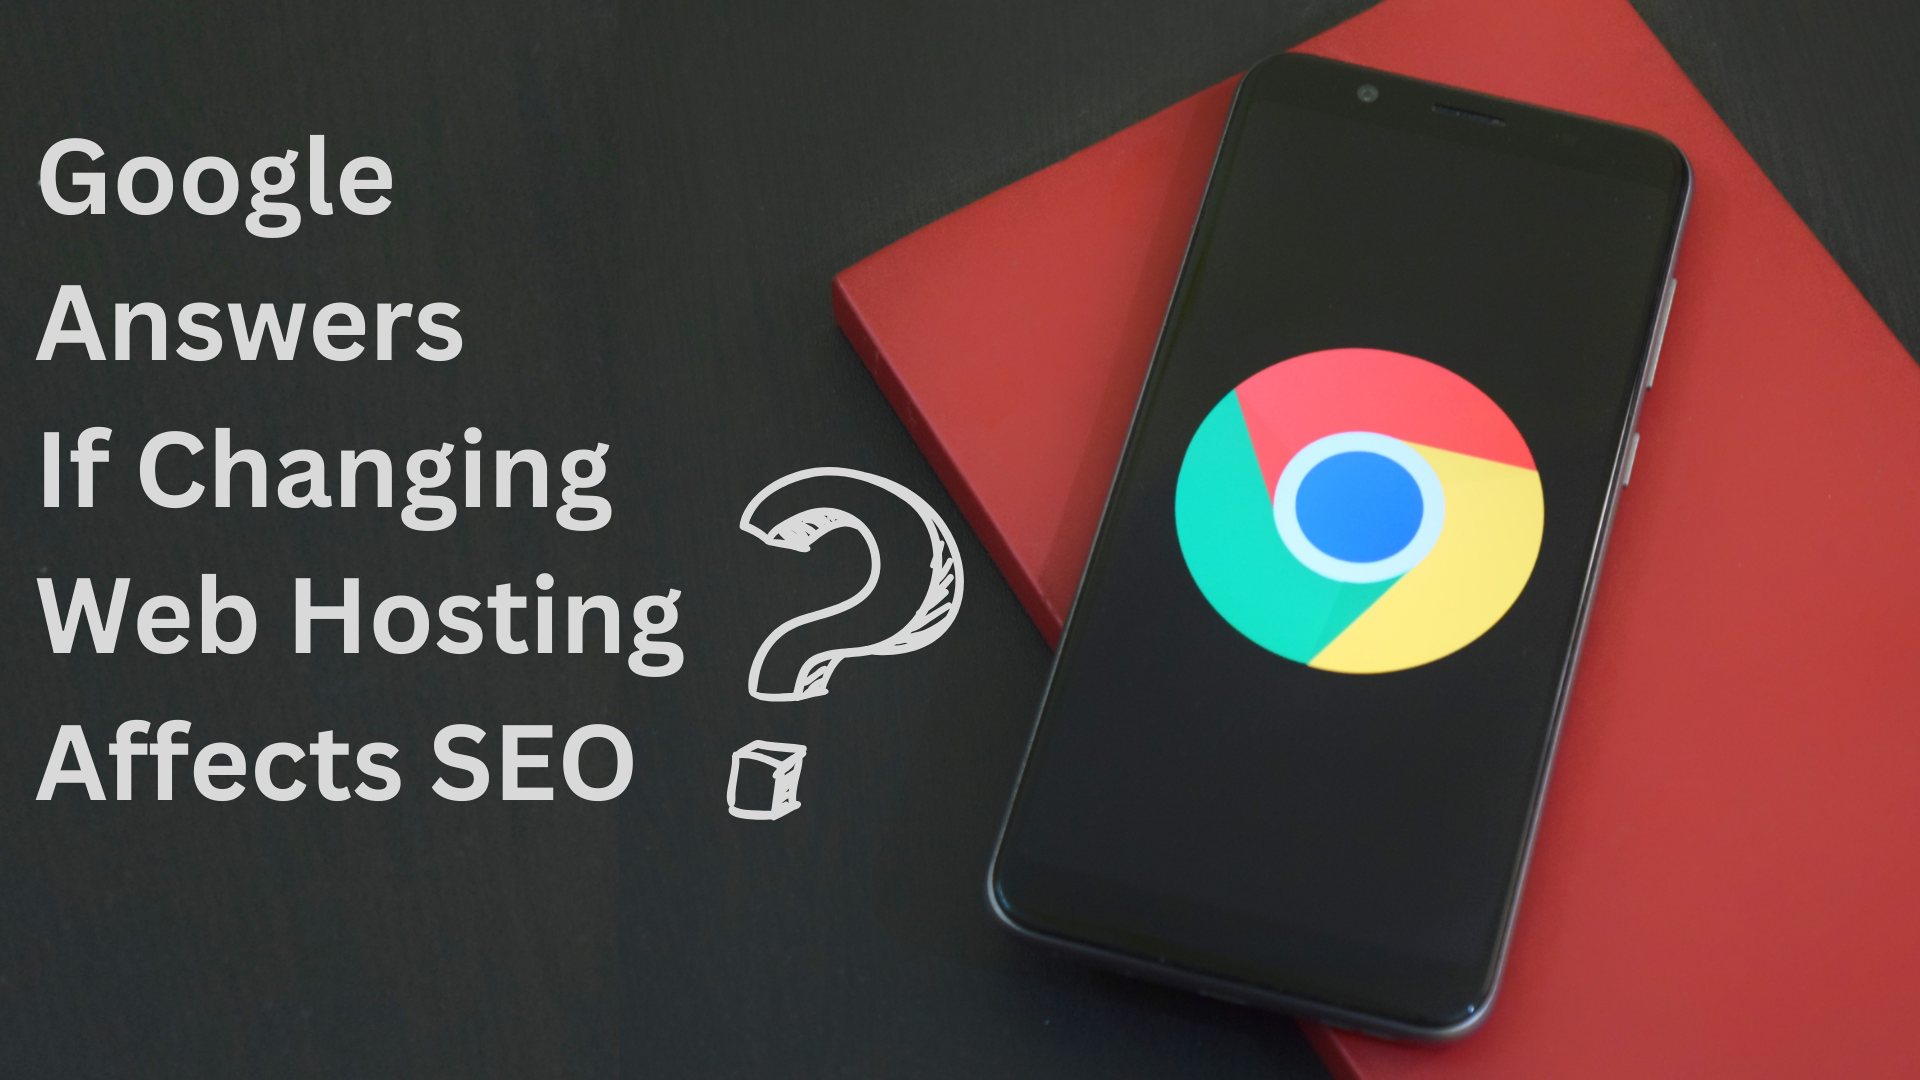 A smartphone with the Google Chrome logo on its screen, placed on a red surface next to a black question mark illustration, with text “Google Answers If Changing Web Hosting Affects SEO” in white letters against a black background.